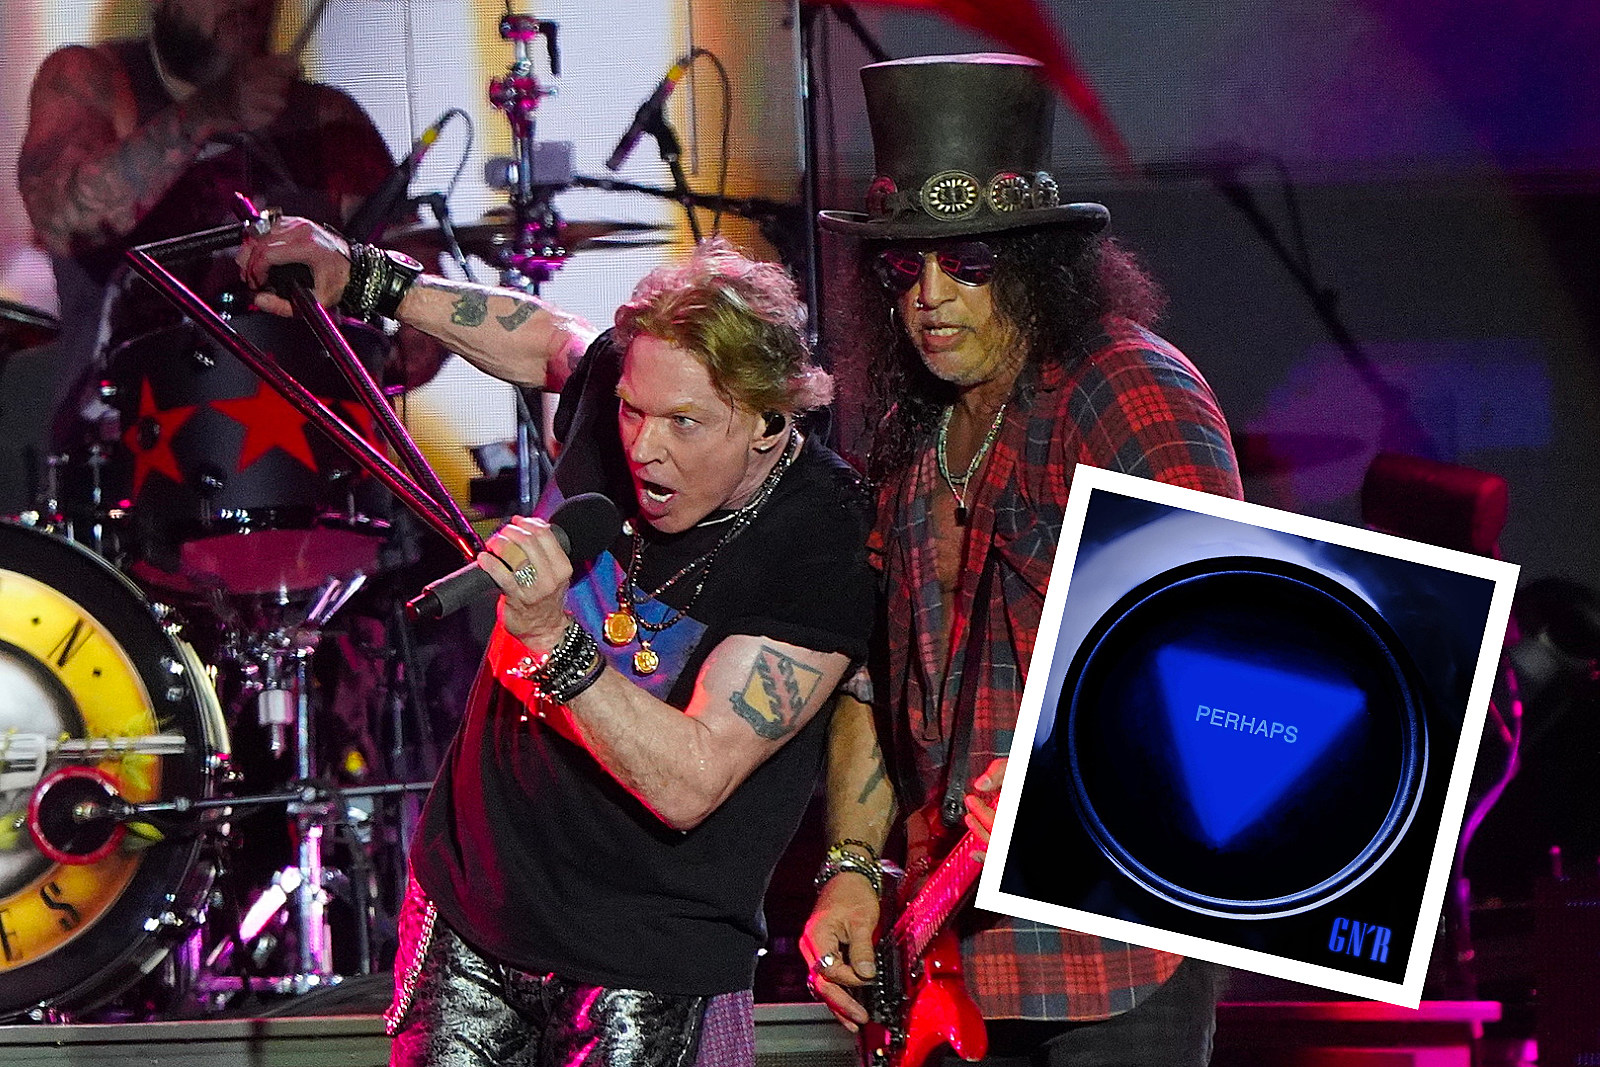 New Guns N' Roses single Perhaps reportedly arriving on Friday